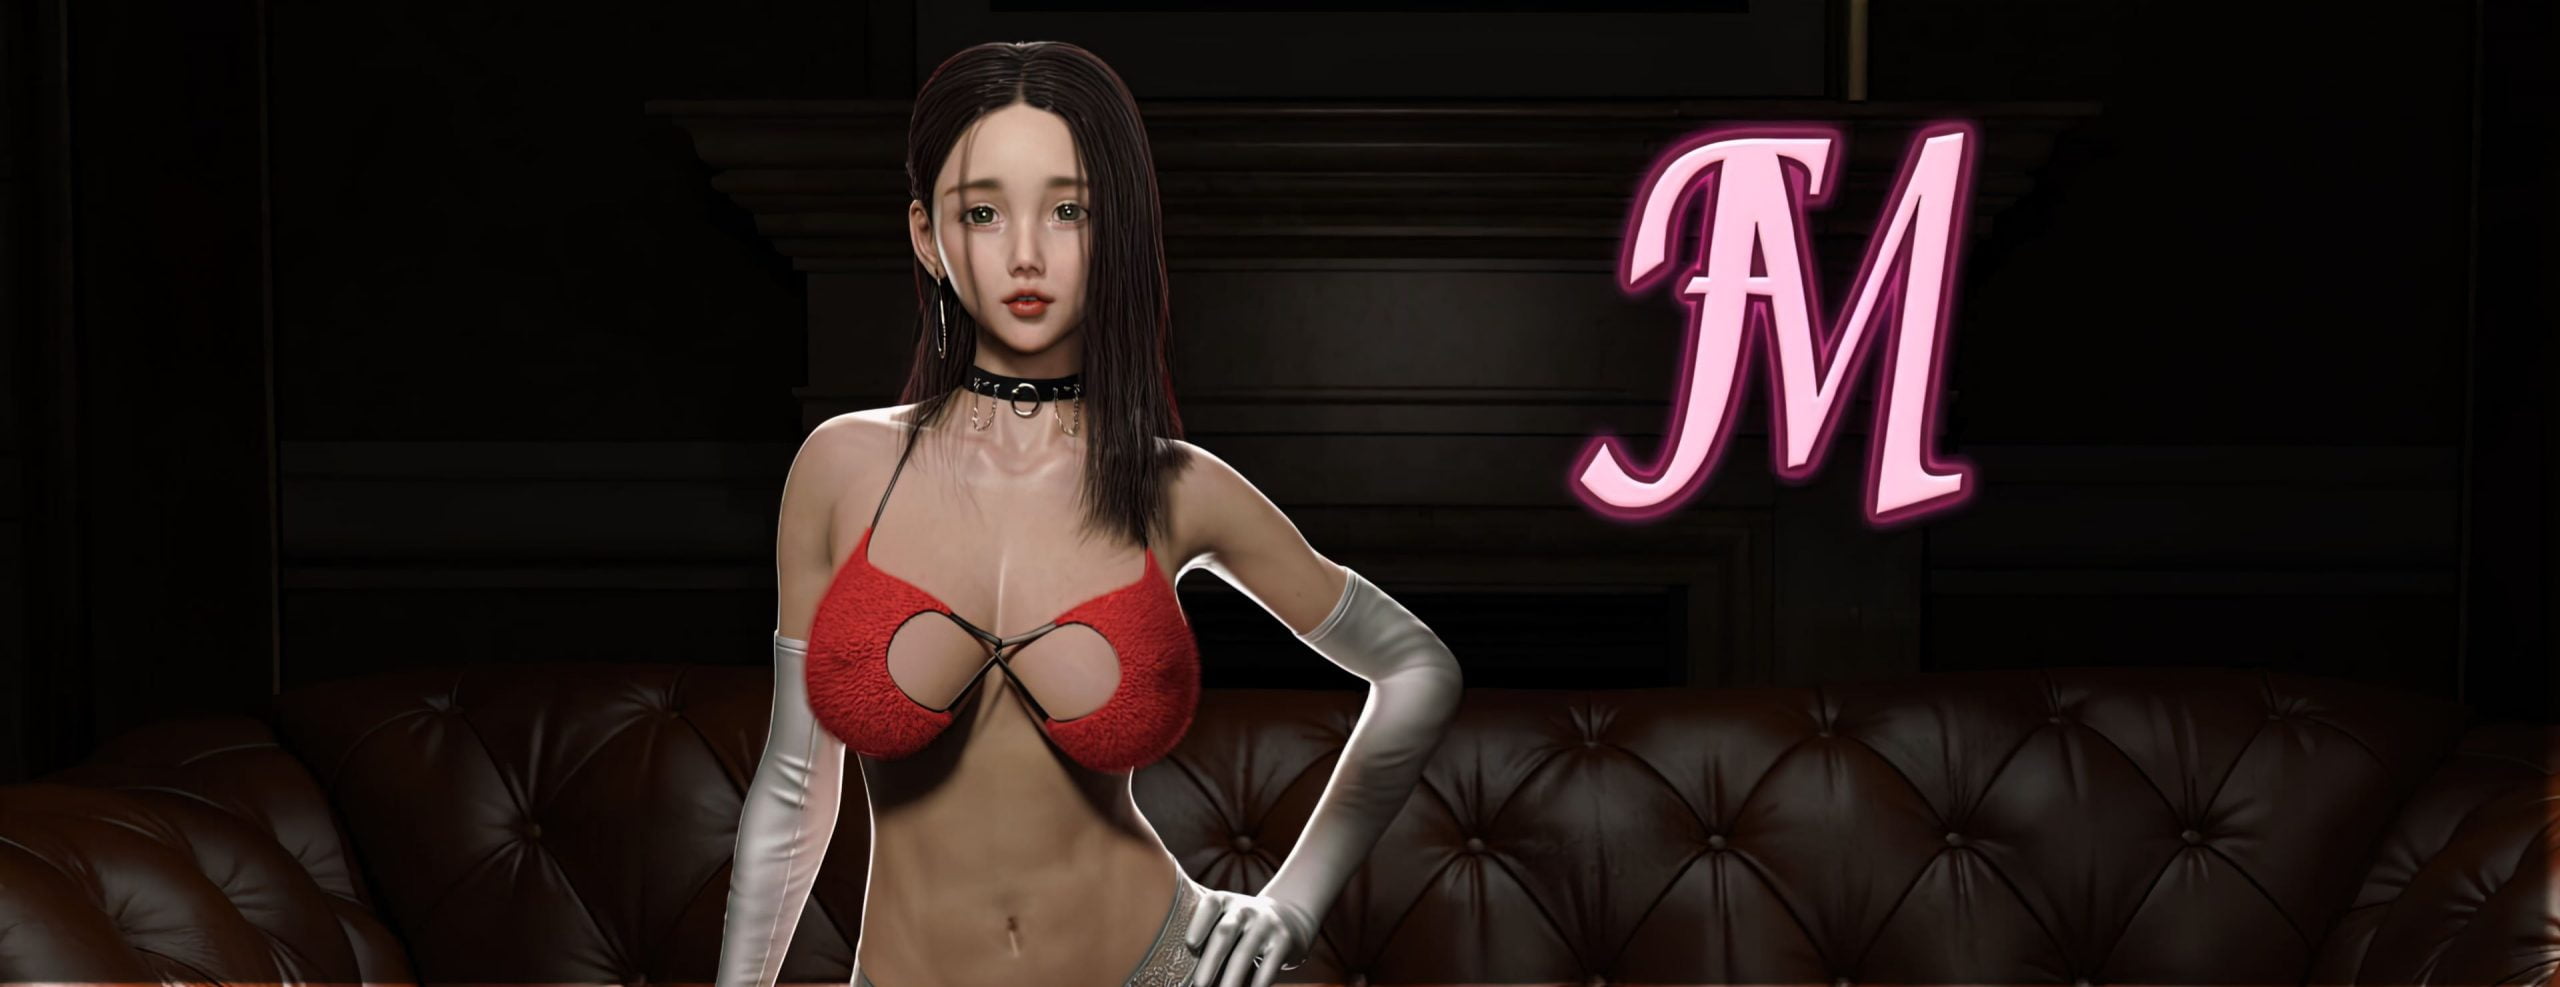 Fuck Mi - Fuck Me! Others Porn Sex Game v.1.1 Download for Windows, Android